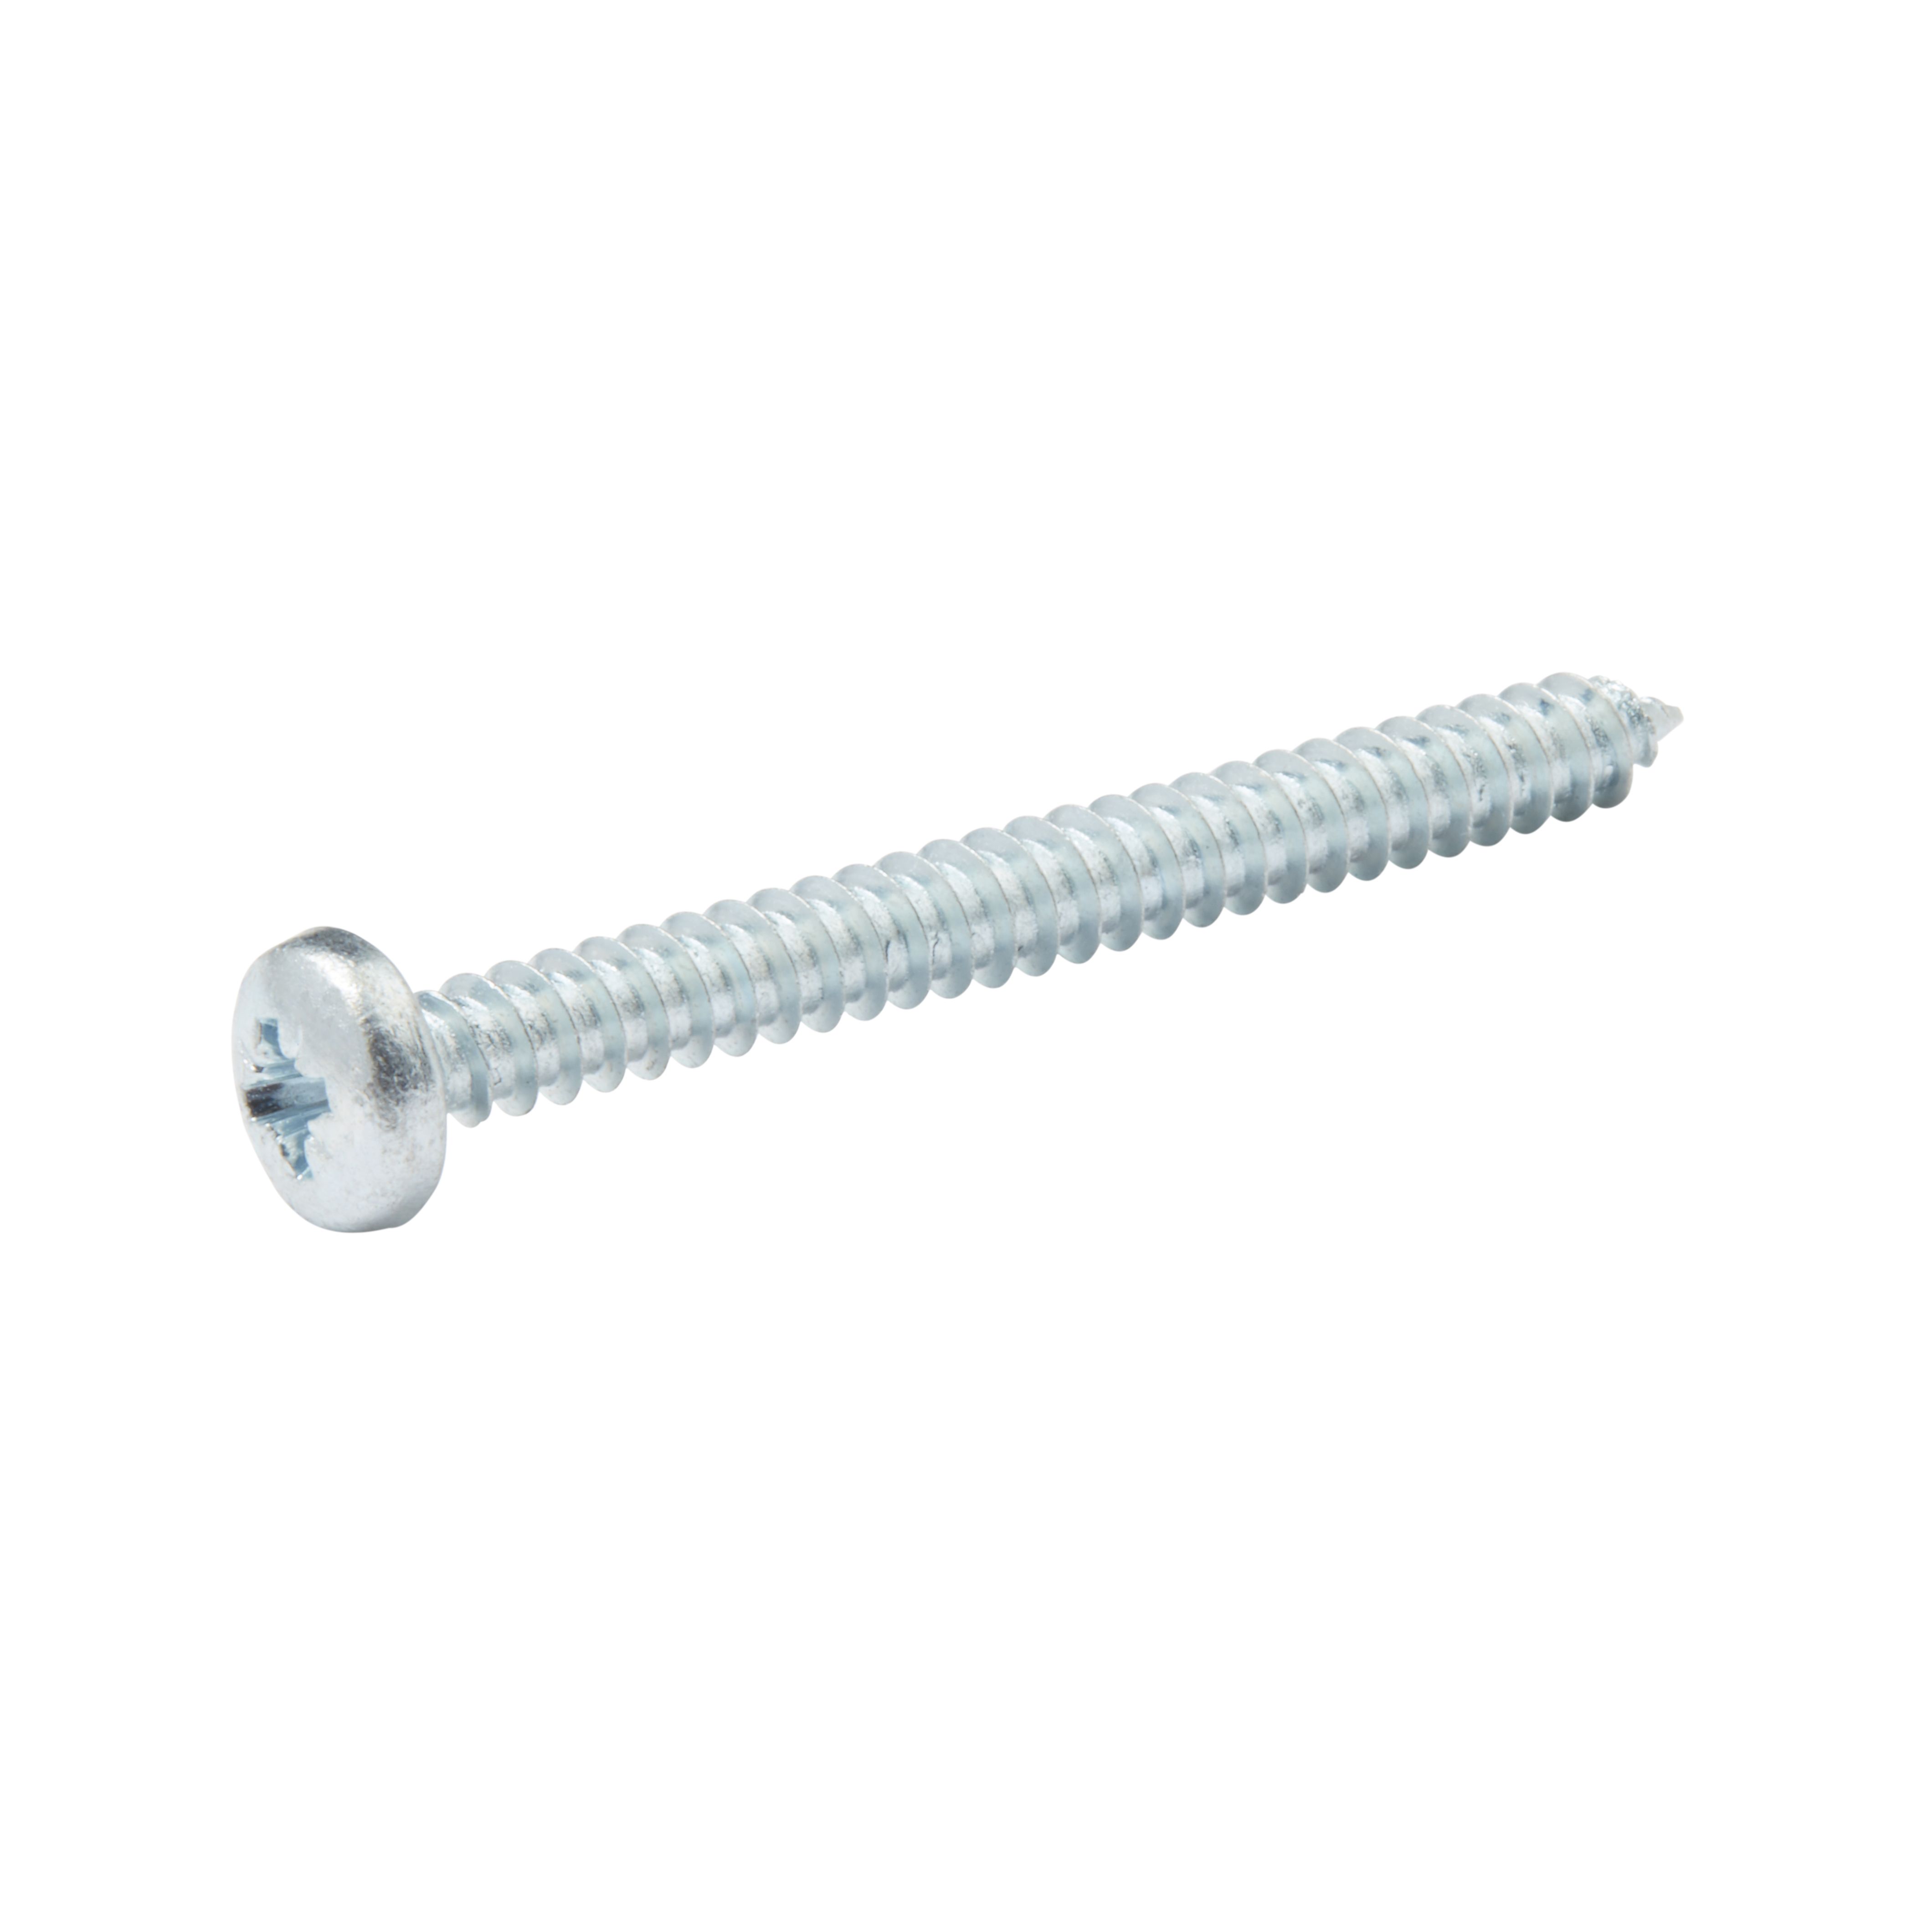 Diall PZ Pan head Zinc-plated Hardened steel Self-drilling screw (Dia)4.8mm (L)50mm, Pack of 25